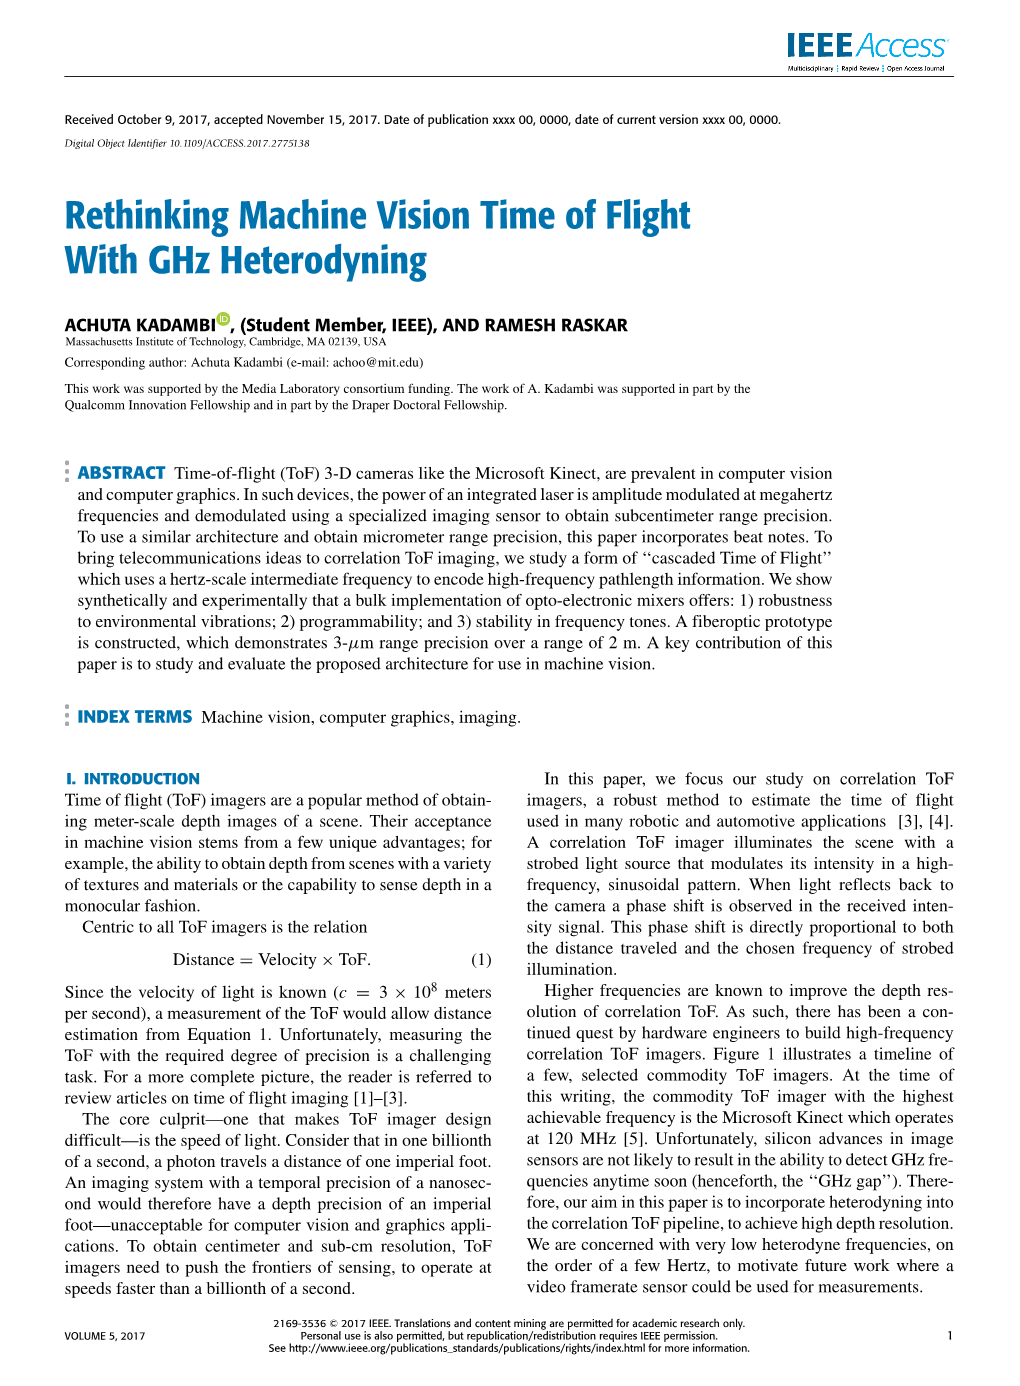 Rethinking Machine Vision Time of Flight with Ghz Heterodyning